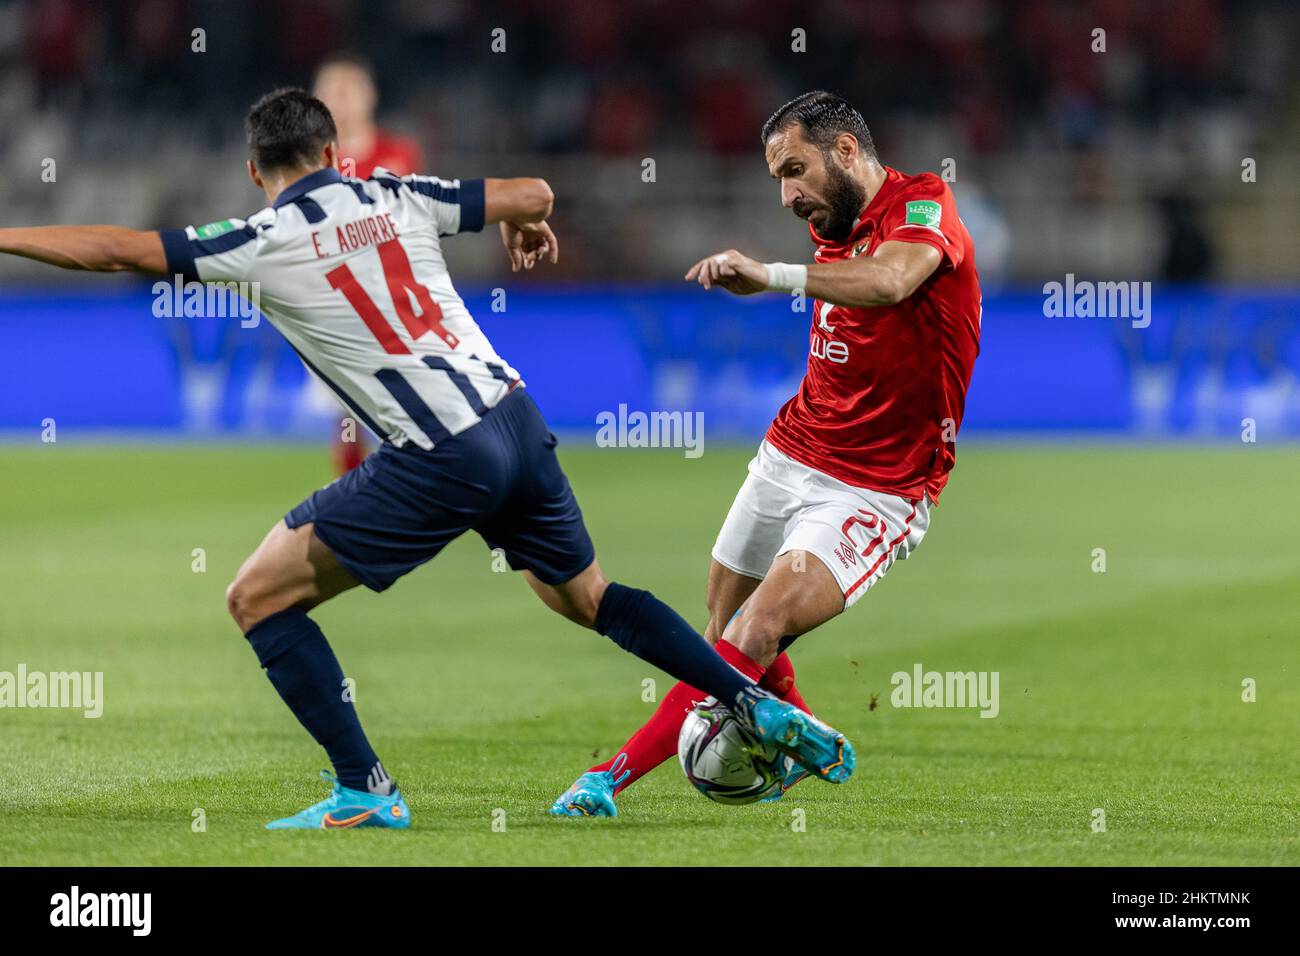 United Arab Emirates, Abu Dhabi - 05 February 2022 - Ali Maaloul of Al-Ahly and Erick Aguirre of C.F. Monterrey in action during the FIFA Club World Cup 2nd round match between Al-Ahly and C.F. Monterrey at Al-Nahyan Stadium, UAE, 05/02/2022. Photo by Ayman Kamel/SFSI Stock Photo